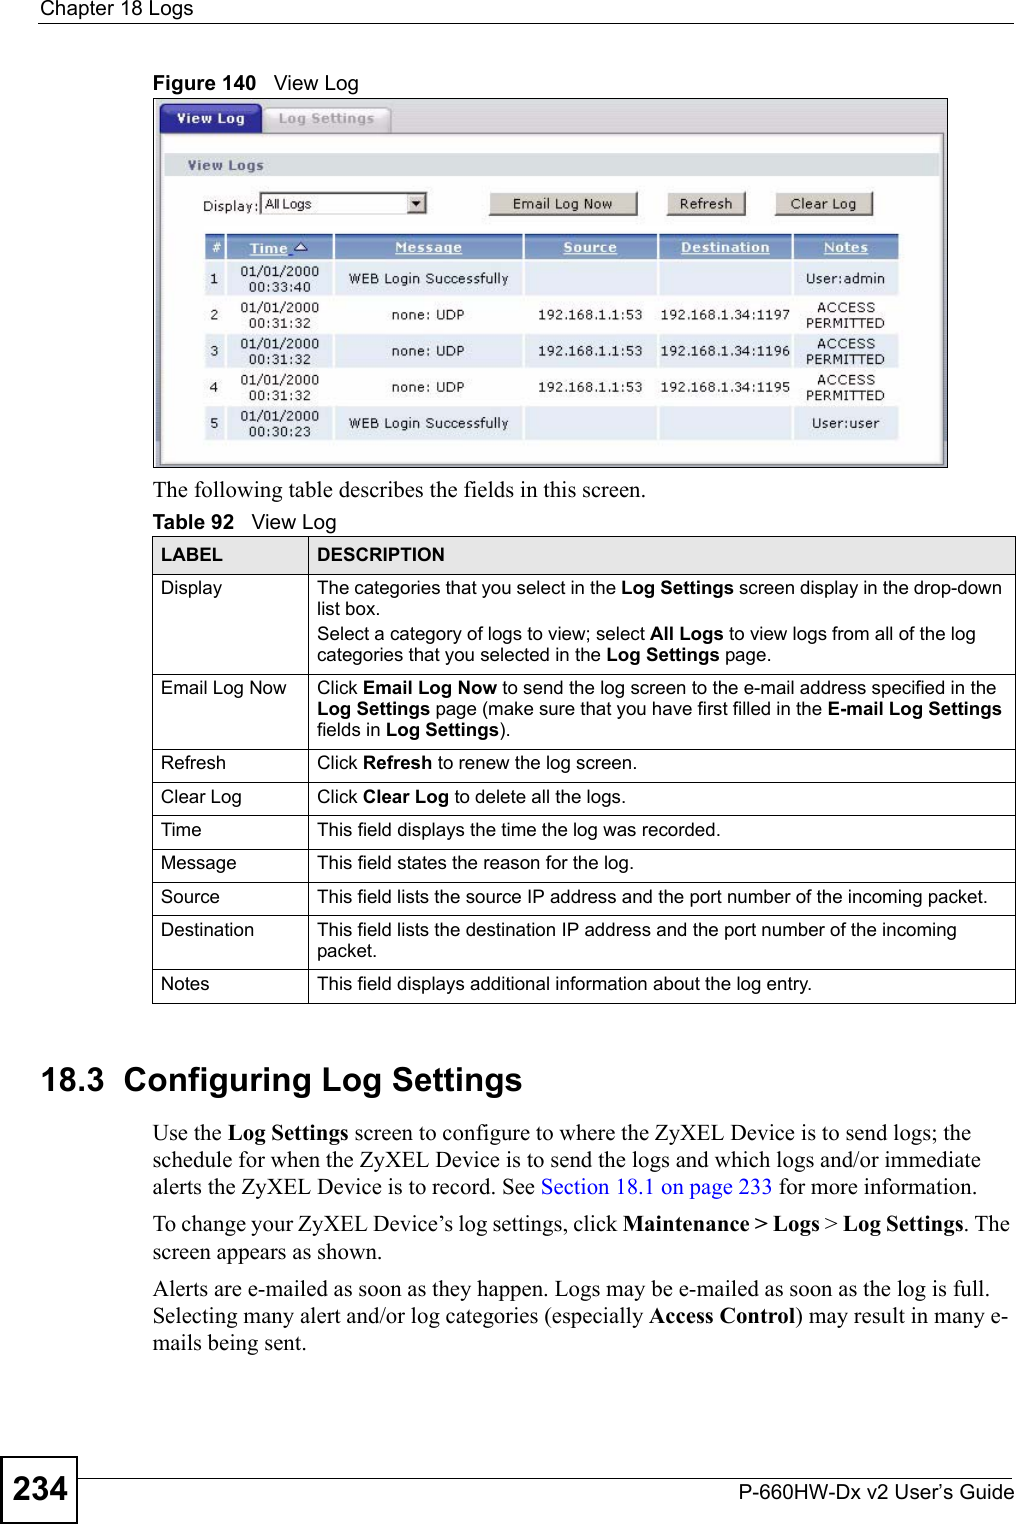 Chapter 18 LogsP-660HW-Dx v2 User’s Guide234Figure 140   View LogThe following table describes the fields in this screen.  18.3  Configuring Log Settings Use the Log Settings screen to configure to where the ZyXEL Device is to send logs; the schedule for when the ZyXEL Device is to send the logs and which logs and/or immediate alerts the ZyXEL Device is to record. See Section 18.1 on page 233 for more information. To change your ZyXEL Device’s log settings, click Maintenance &gt; Logs &gt; Log Settings. The screen appears as shown.Alerts are e-mailed as soon as they happen. Logs may be e-mailed as soon as the log is full. Selecting many alert and/or log categories (especially Access Control) may result in many e-mails being sent.Table 92   View LogLABEL DESCRIPTIONDisplay  The categories that you select in the Log Settings screen display in the drop-down list box.Select a category of logs to view; select All Logs to view logs from all of the log categories that you selected in the Log Settings page. Email Log Now  Click Email Log Now to send the log screen to the e-mail address specified in the Log Settings page (make sure that you have first filled in the E-mail Log Settings fields in Log Settings).Refresh Click Refresh to renew the log screen. Clear Log  Click Clear Log to delete all the logs. Time  This field displays the time the log was recorded. Message This field states the reason for the log.Source This field lists the source IP address and the port number of the incoming packet.Destination  This field lists the destination IP address and the port number of the incoming packet.Notes This field displays additional information about the log entry. 